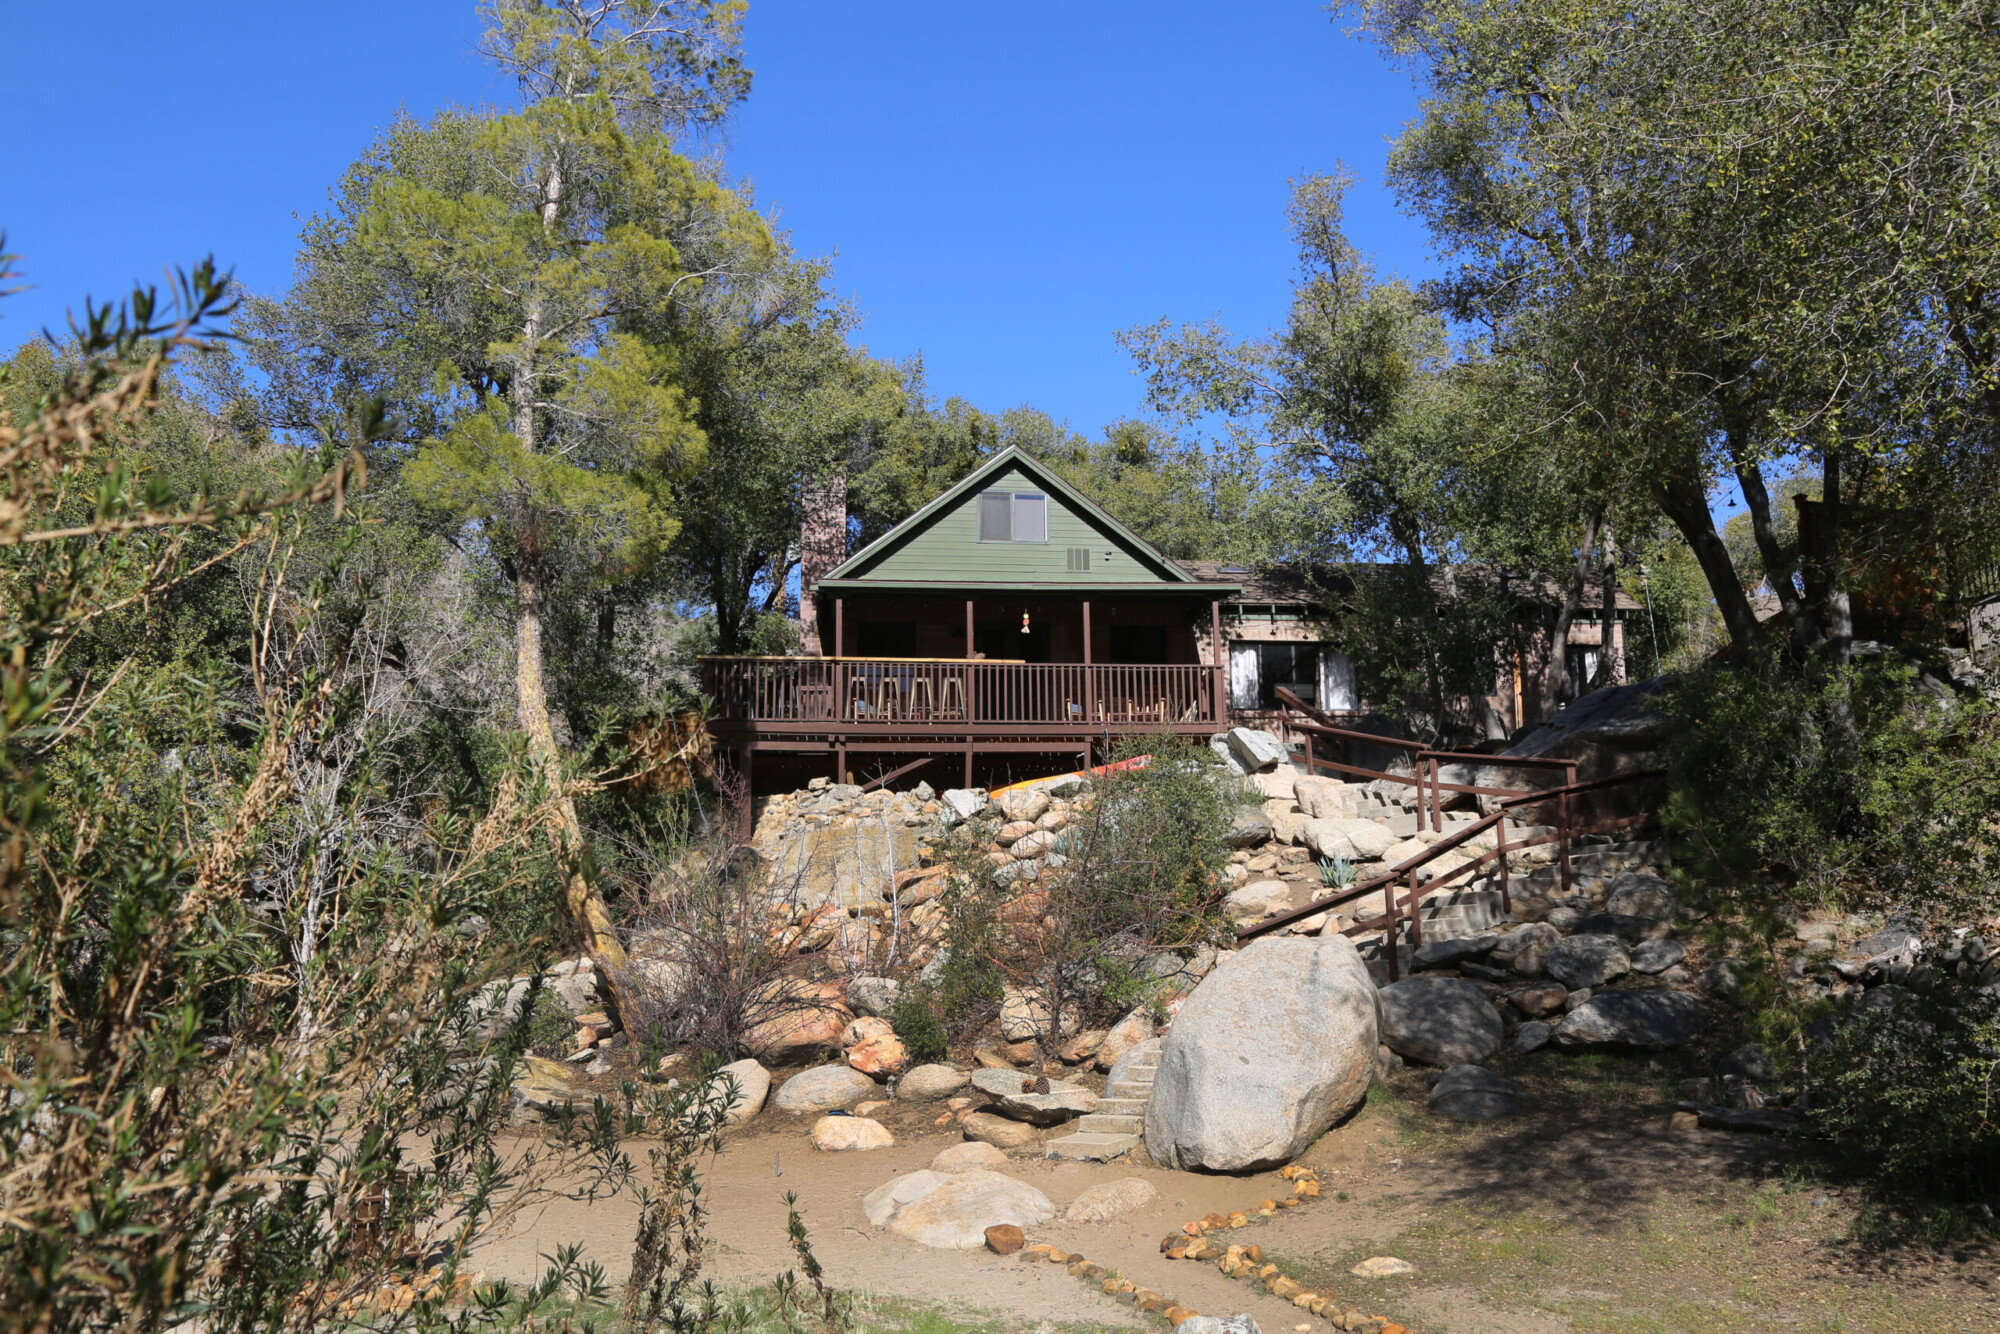 Exterior view of Kern River vacation rental house with a large deck set in surrounding forest near Kernville, California.